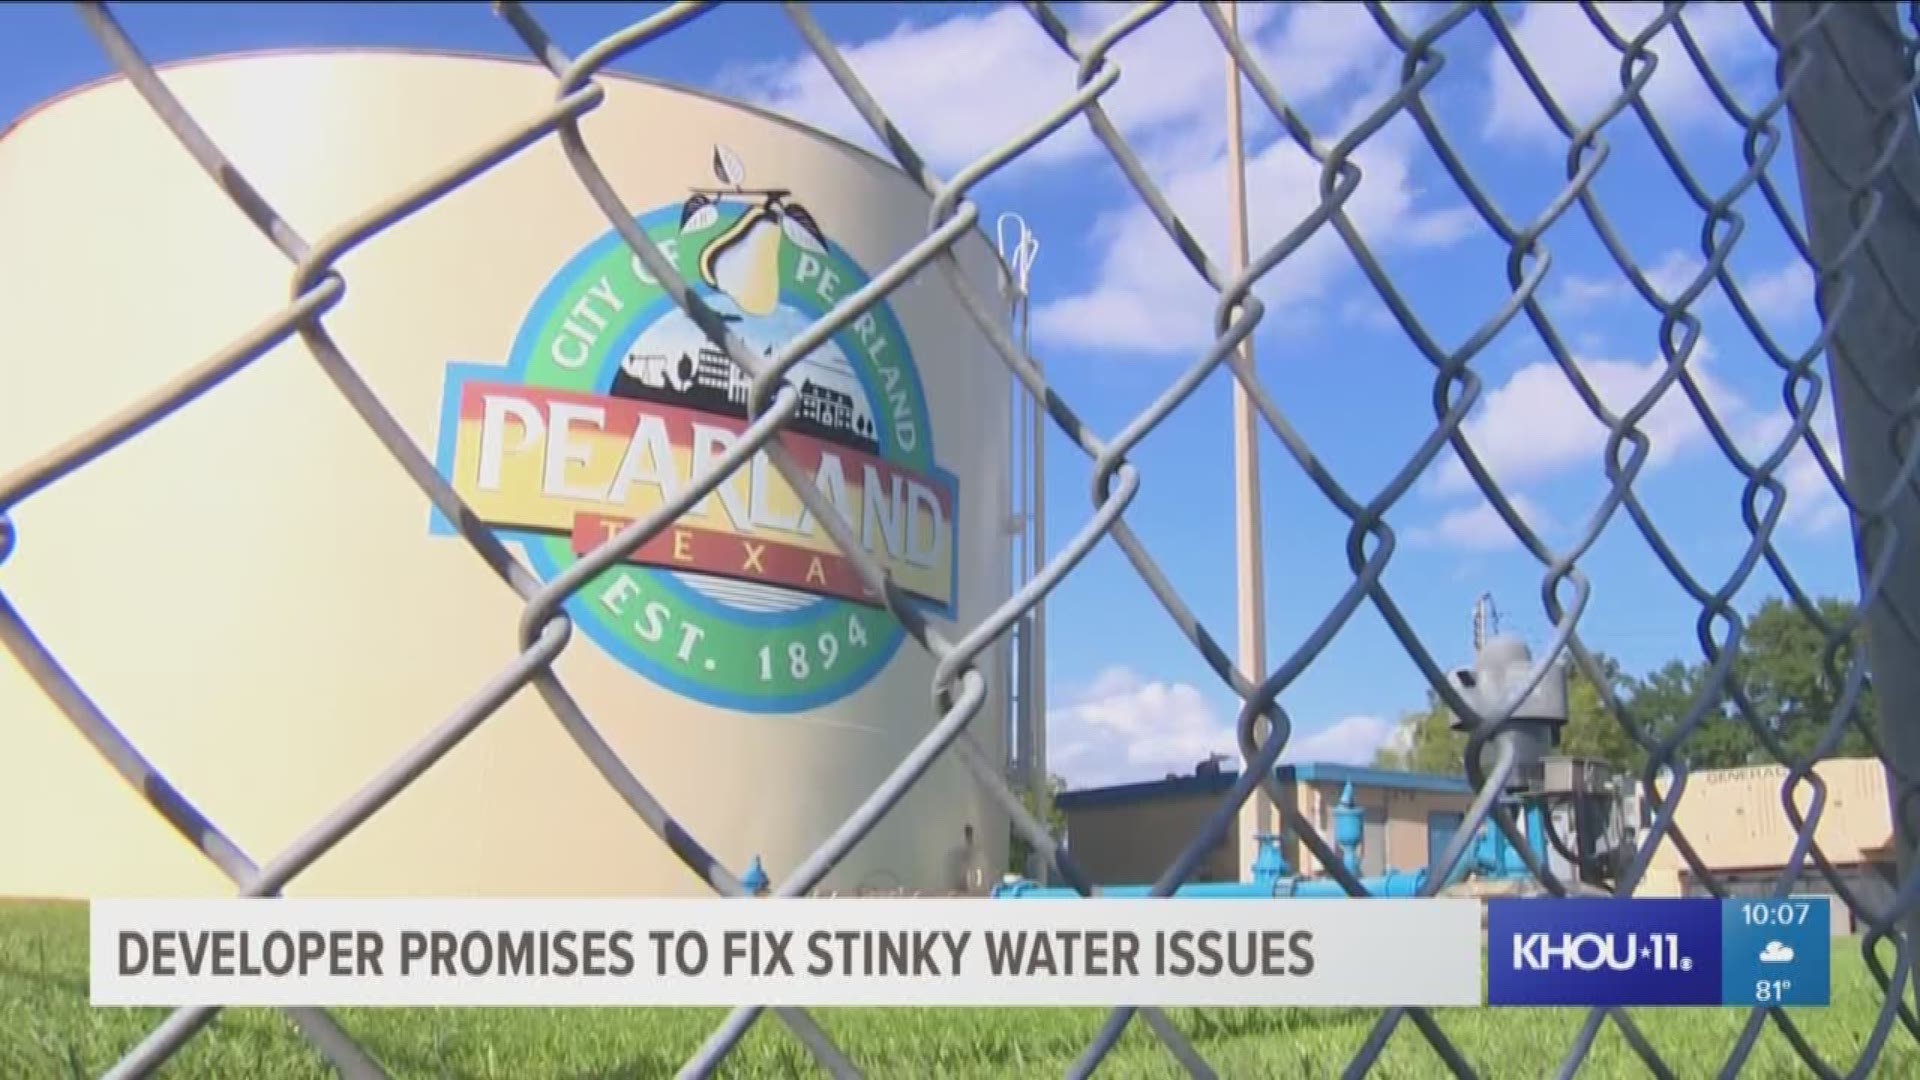 Canterbury Park neighbors are relieved that home builders are fixing their stinky water problem after years of complaints. 